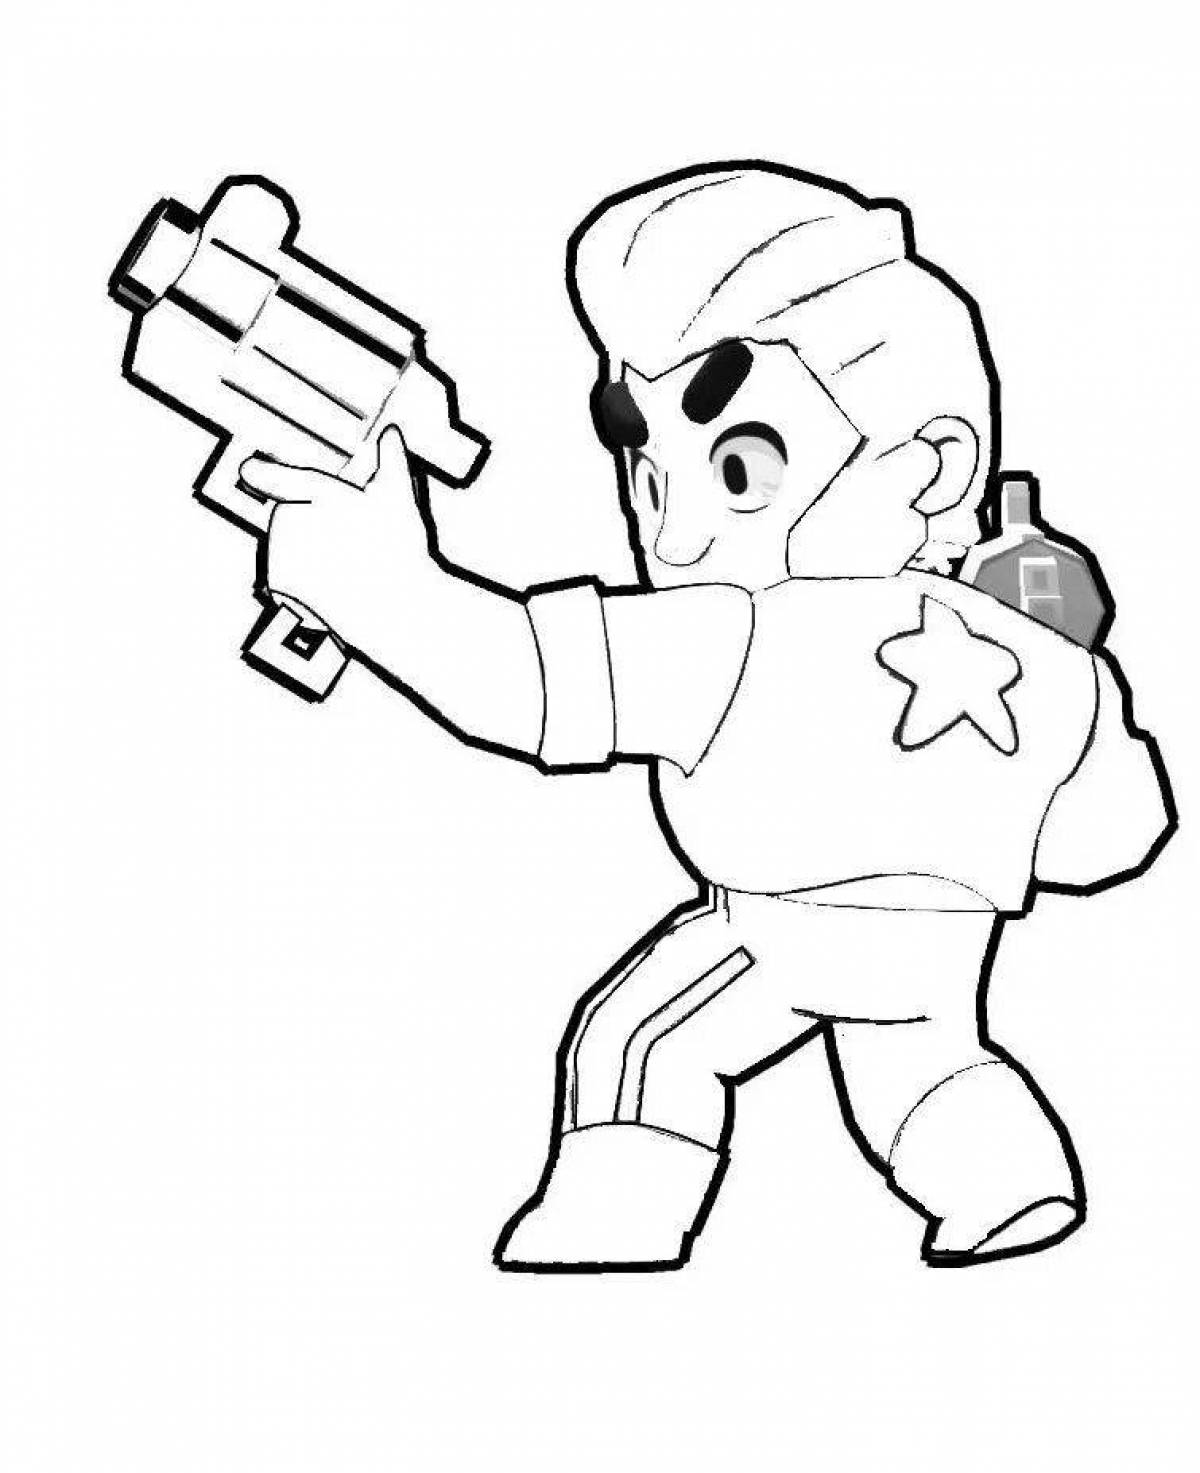 Coloring page of a nice colt